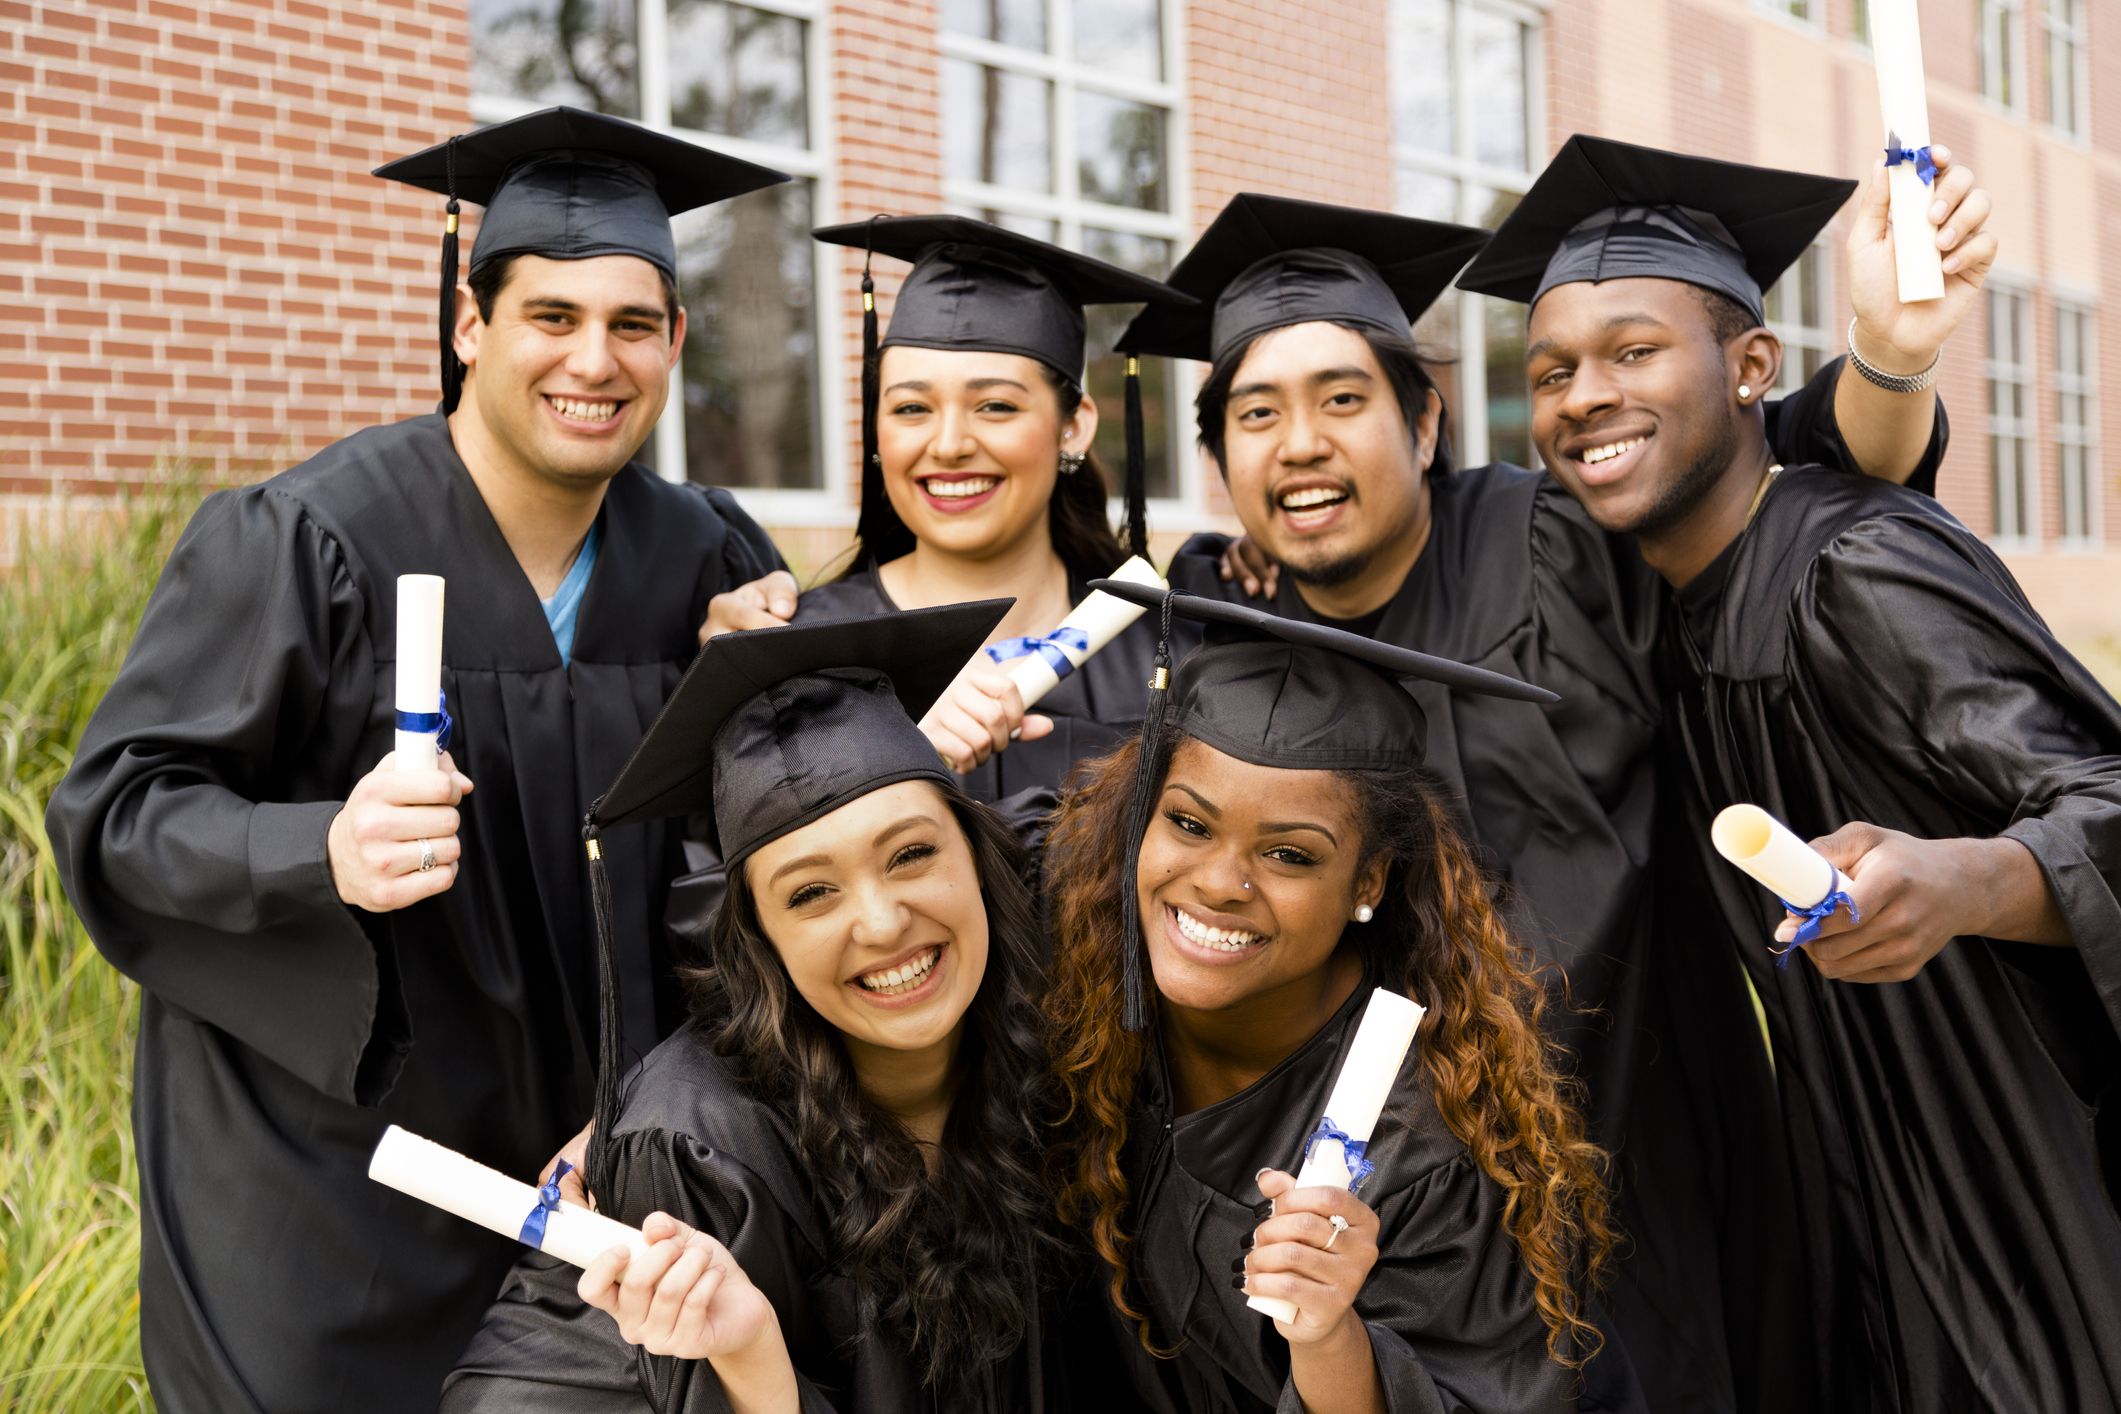 Diverse group of friends dressed in cap and gowns excitedly show off diplomas after college graduation. School building background.